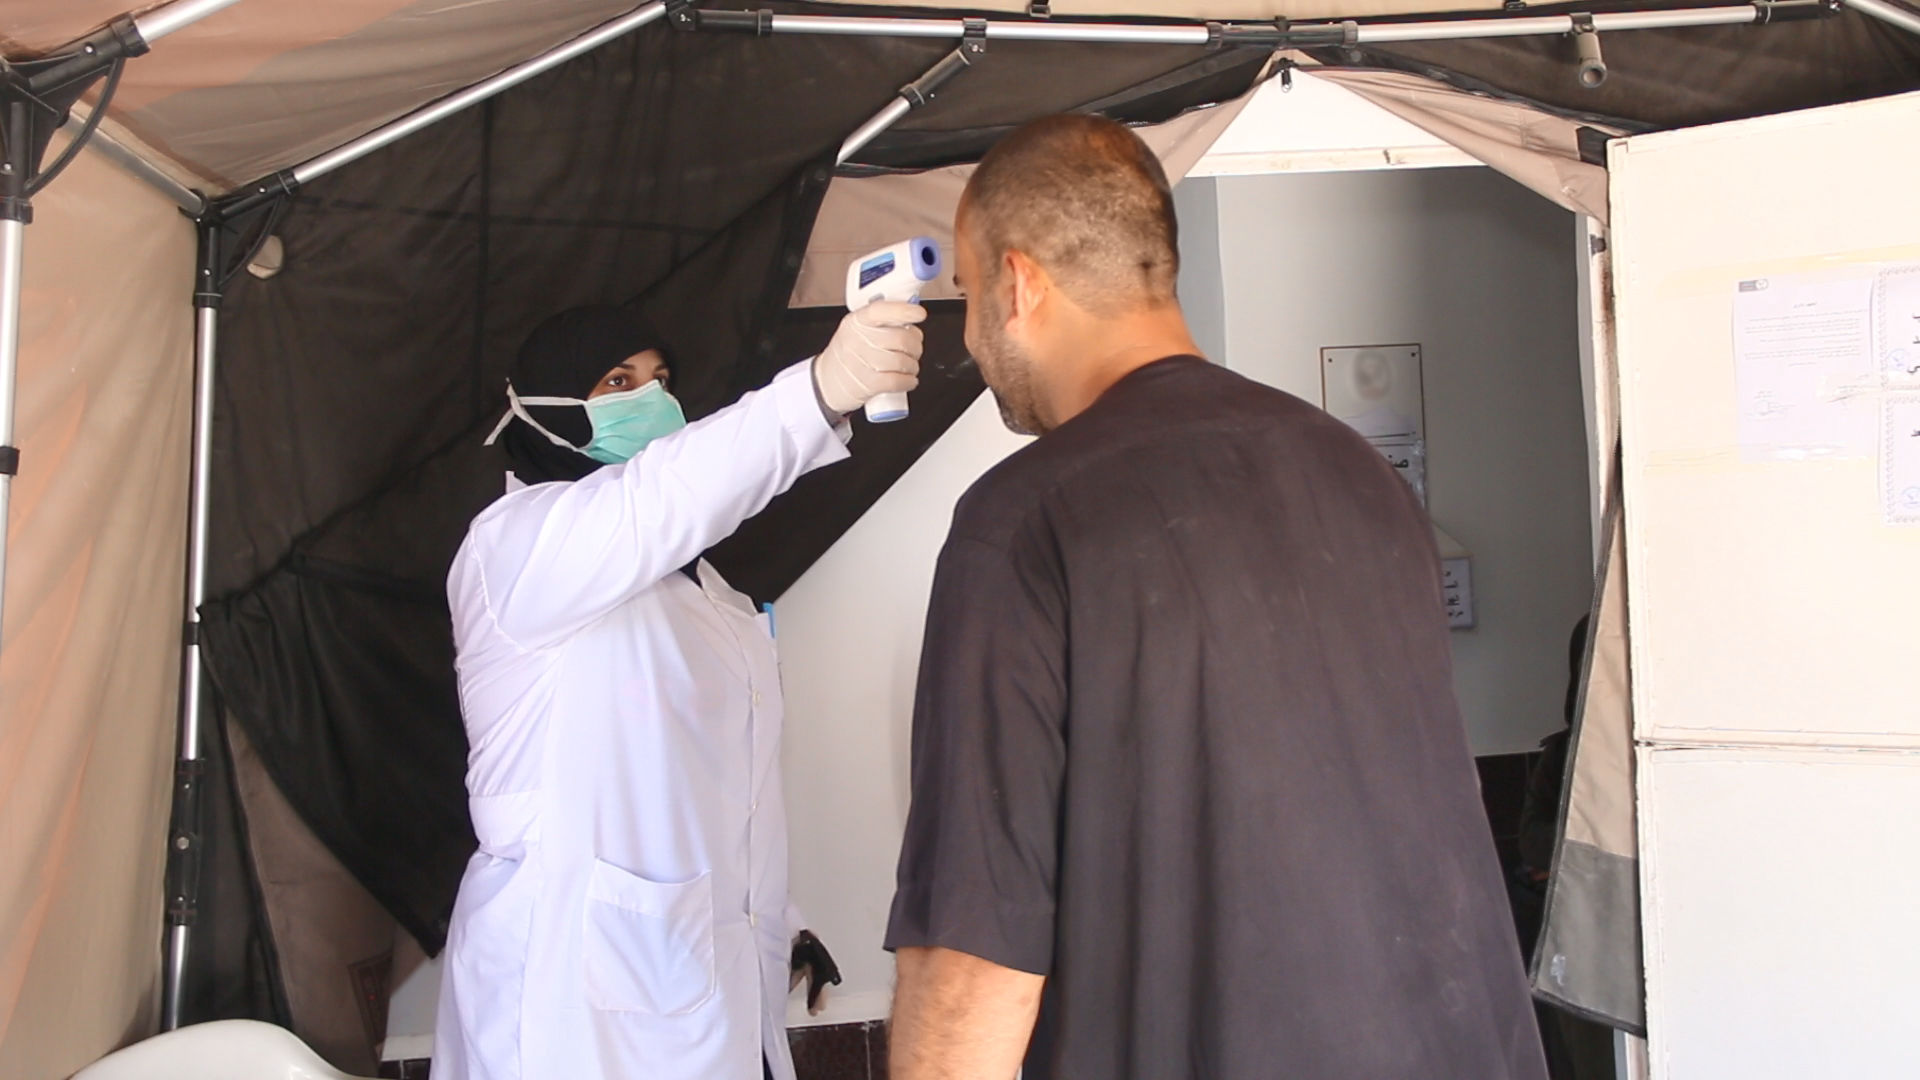 At WV’s health centre’s isolation tent, basic safety examinations against COVID-19 are performed to assess patients’ conditions.